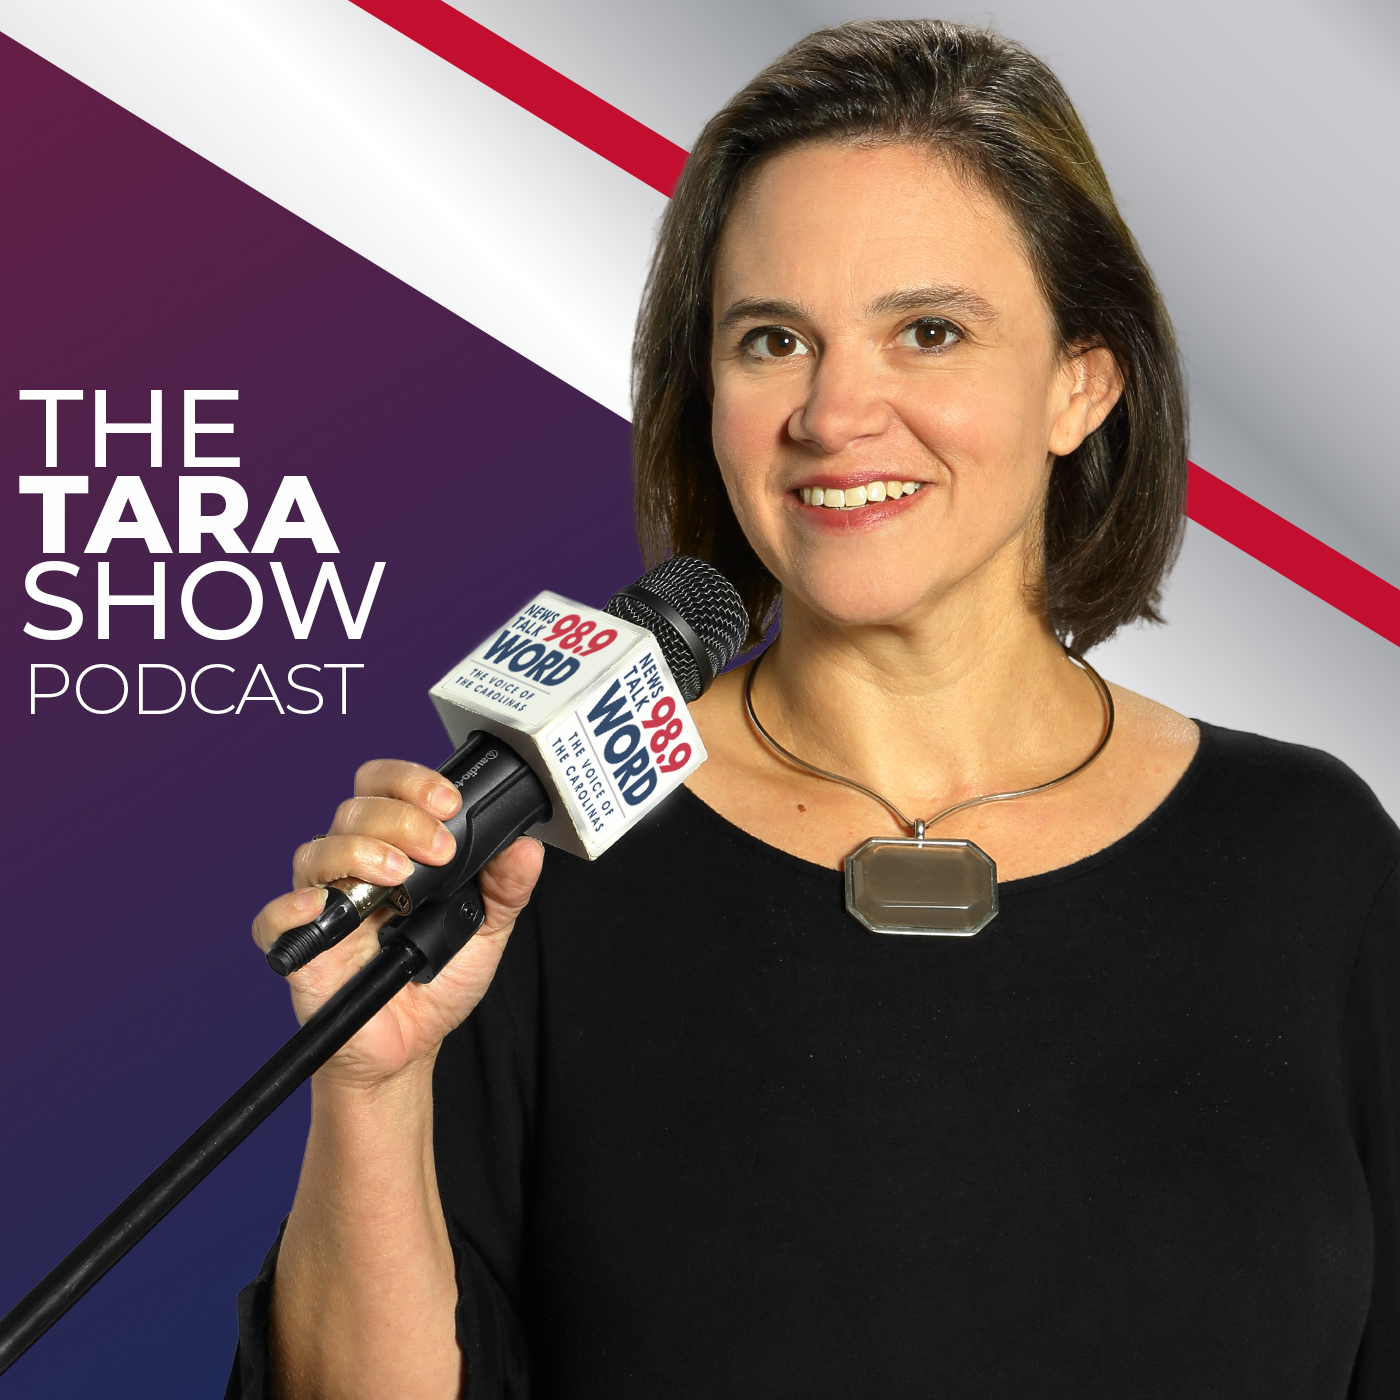 Hour 1: The Tara Show - “The Biggest Threat to American Rights and Freedoms” “Mothers Day and Watching the Homeland” “The Tyranny of a Nation” “ Tara’s Resolve” 